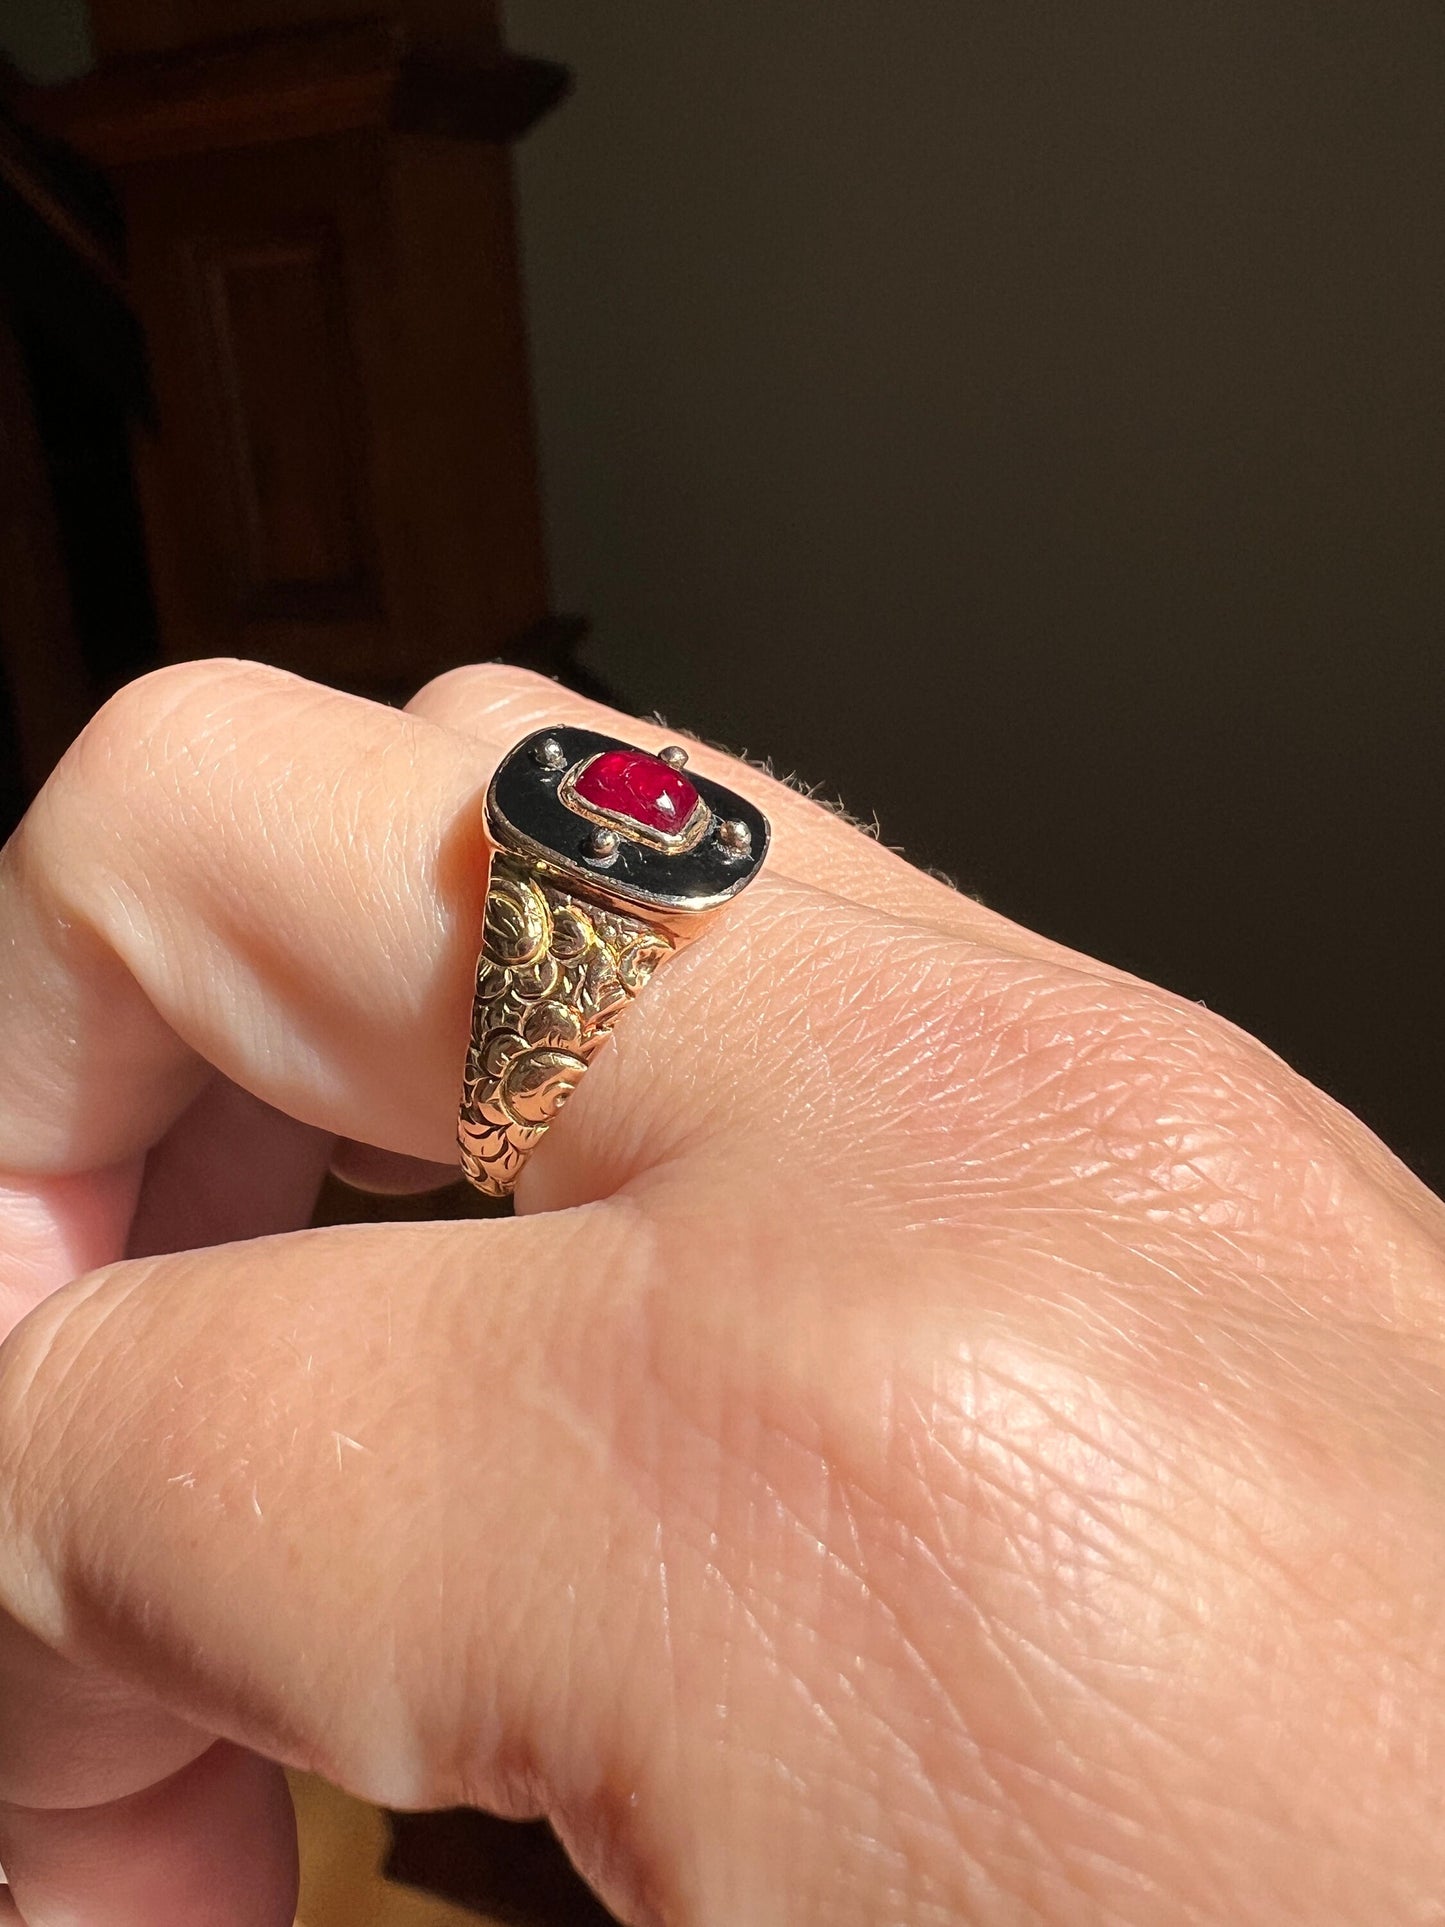 GEORGIAN Era Antique Ruby DATED 1818 Black Enamel Halo Rivets FLORAL Ring 14k Gold Bullseye Cabochon Embossed Mourning Band Red Victorian